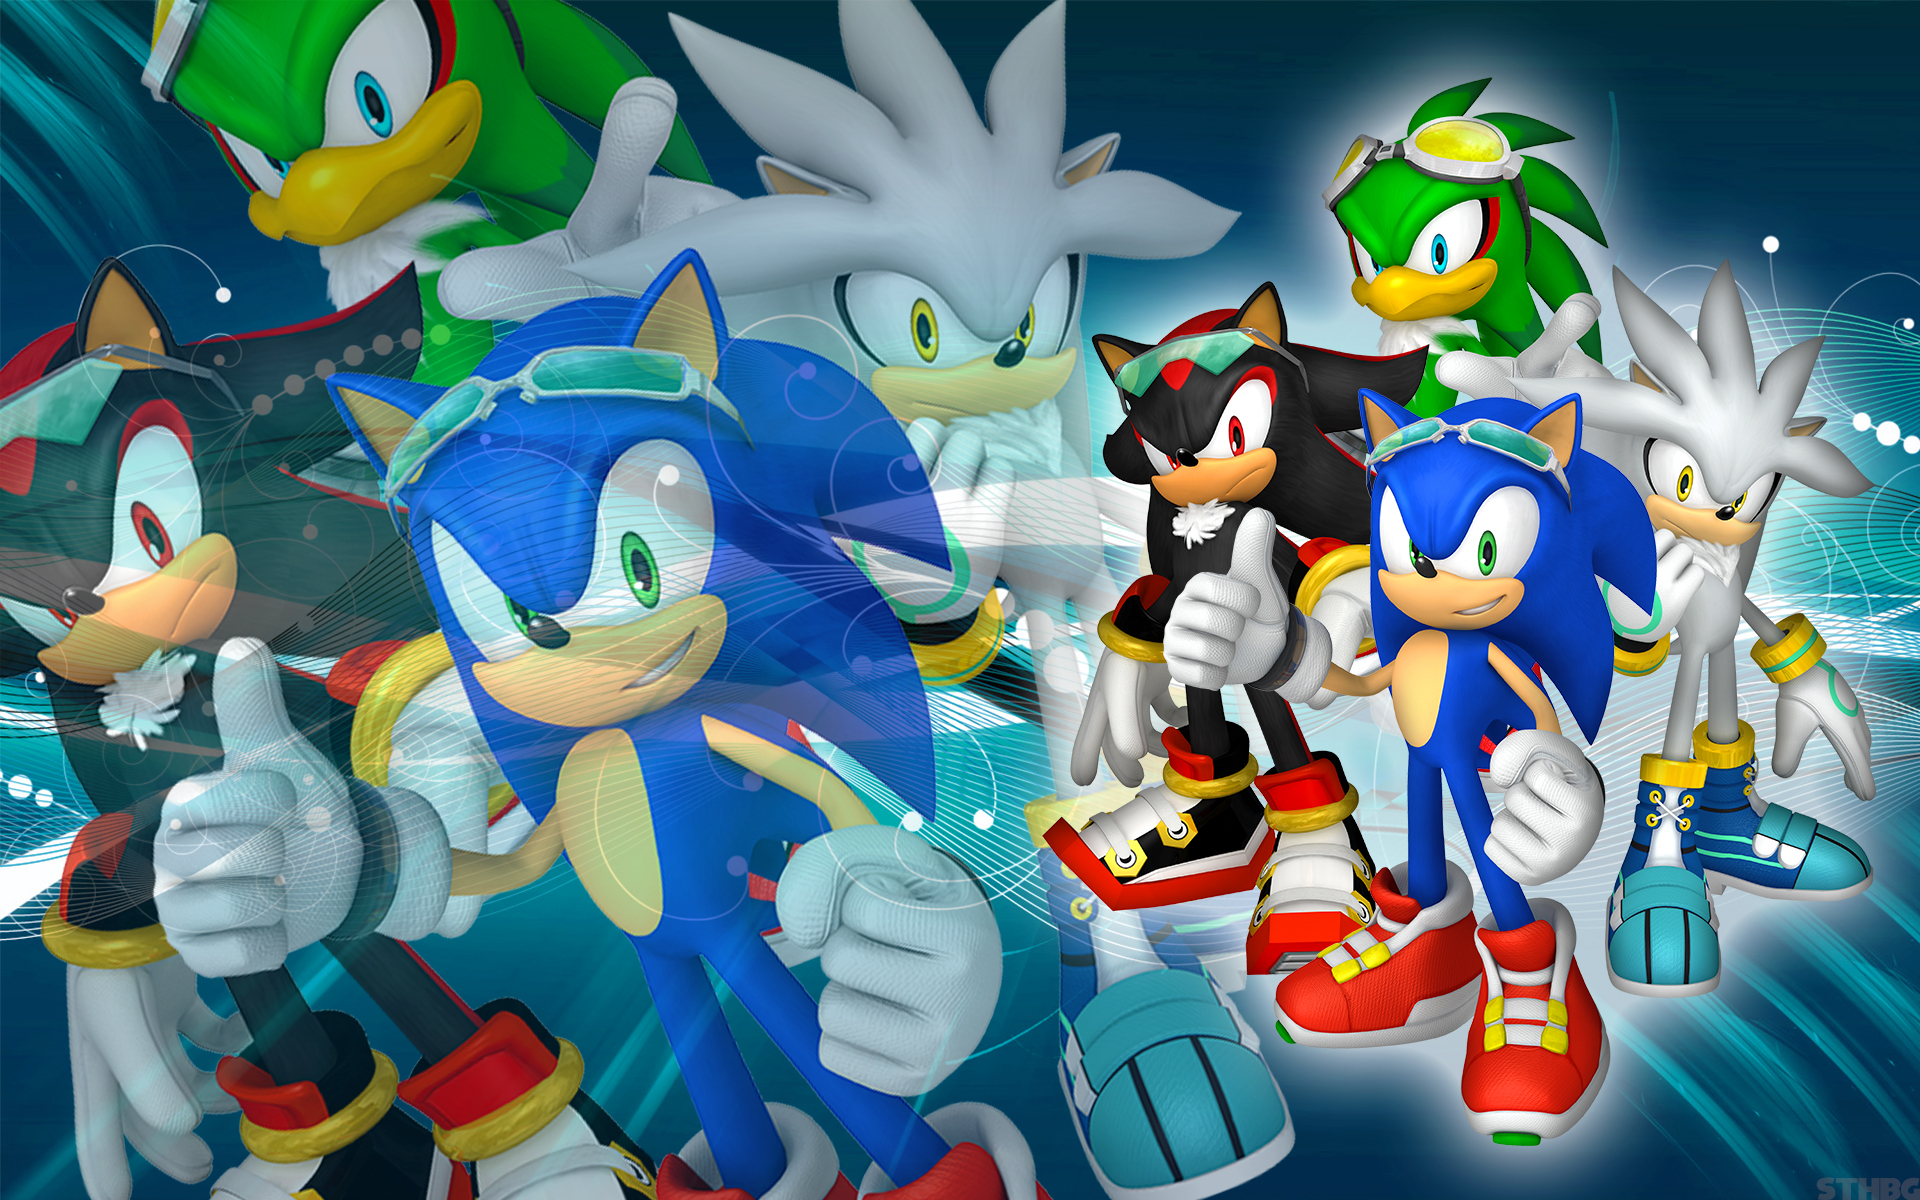 Sonic, Shadow, Silver And Jet - SFR - Wallpaper